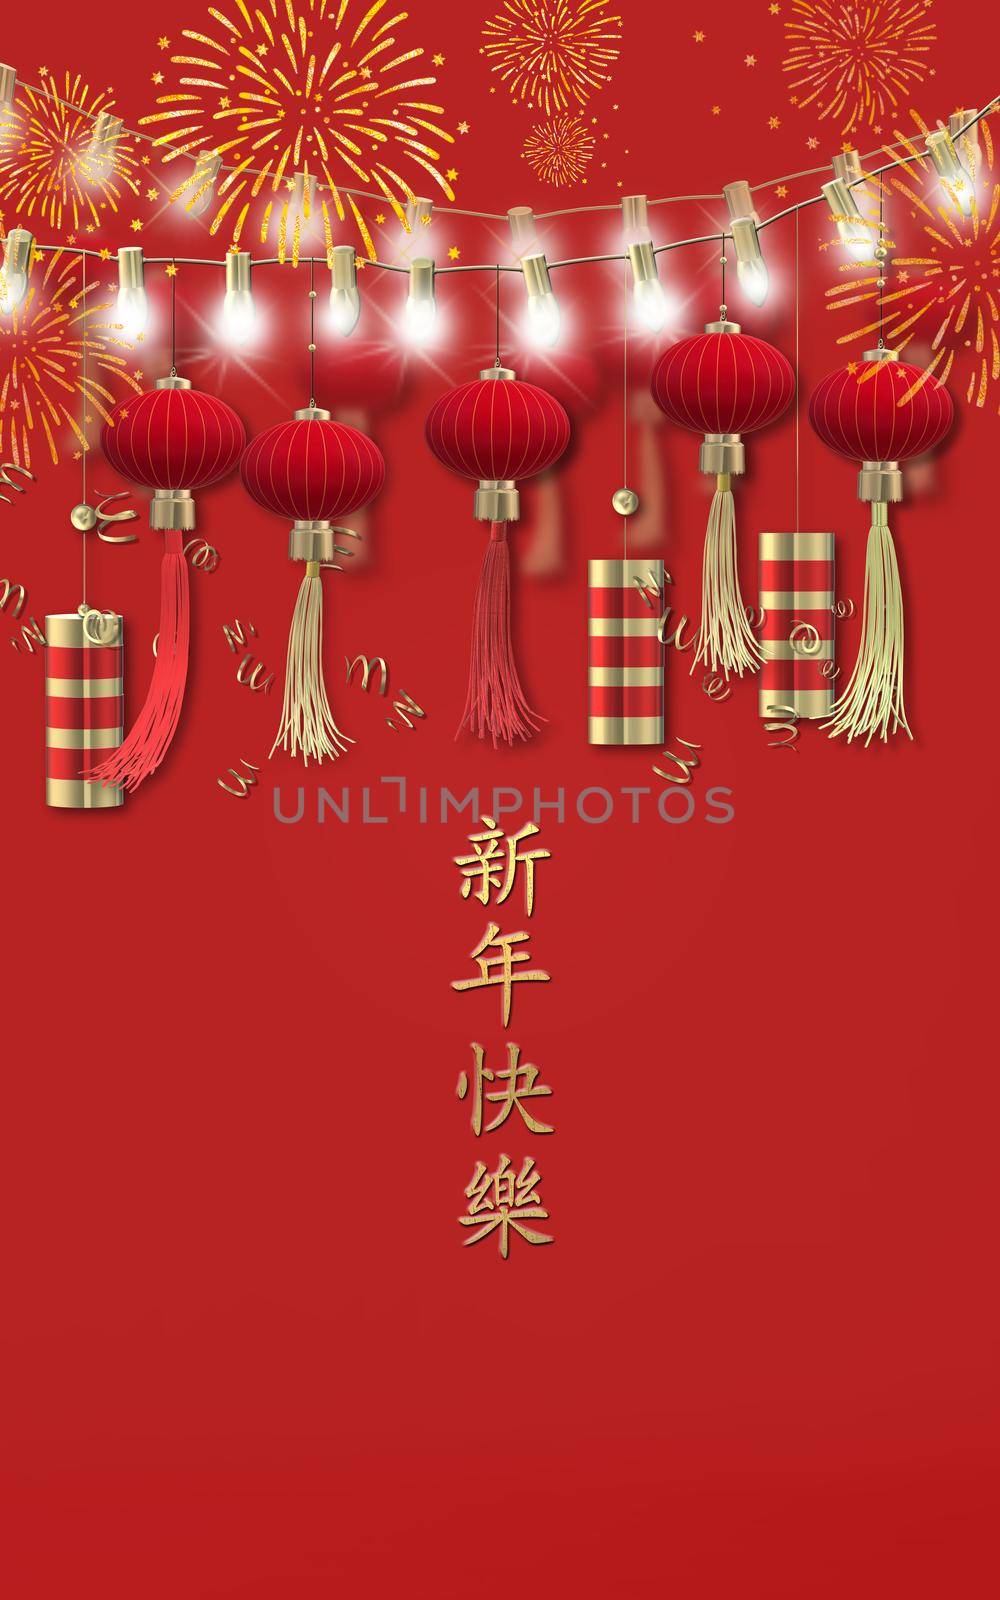 Red and gold traditional Chinese lanterns by NelliPolk